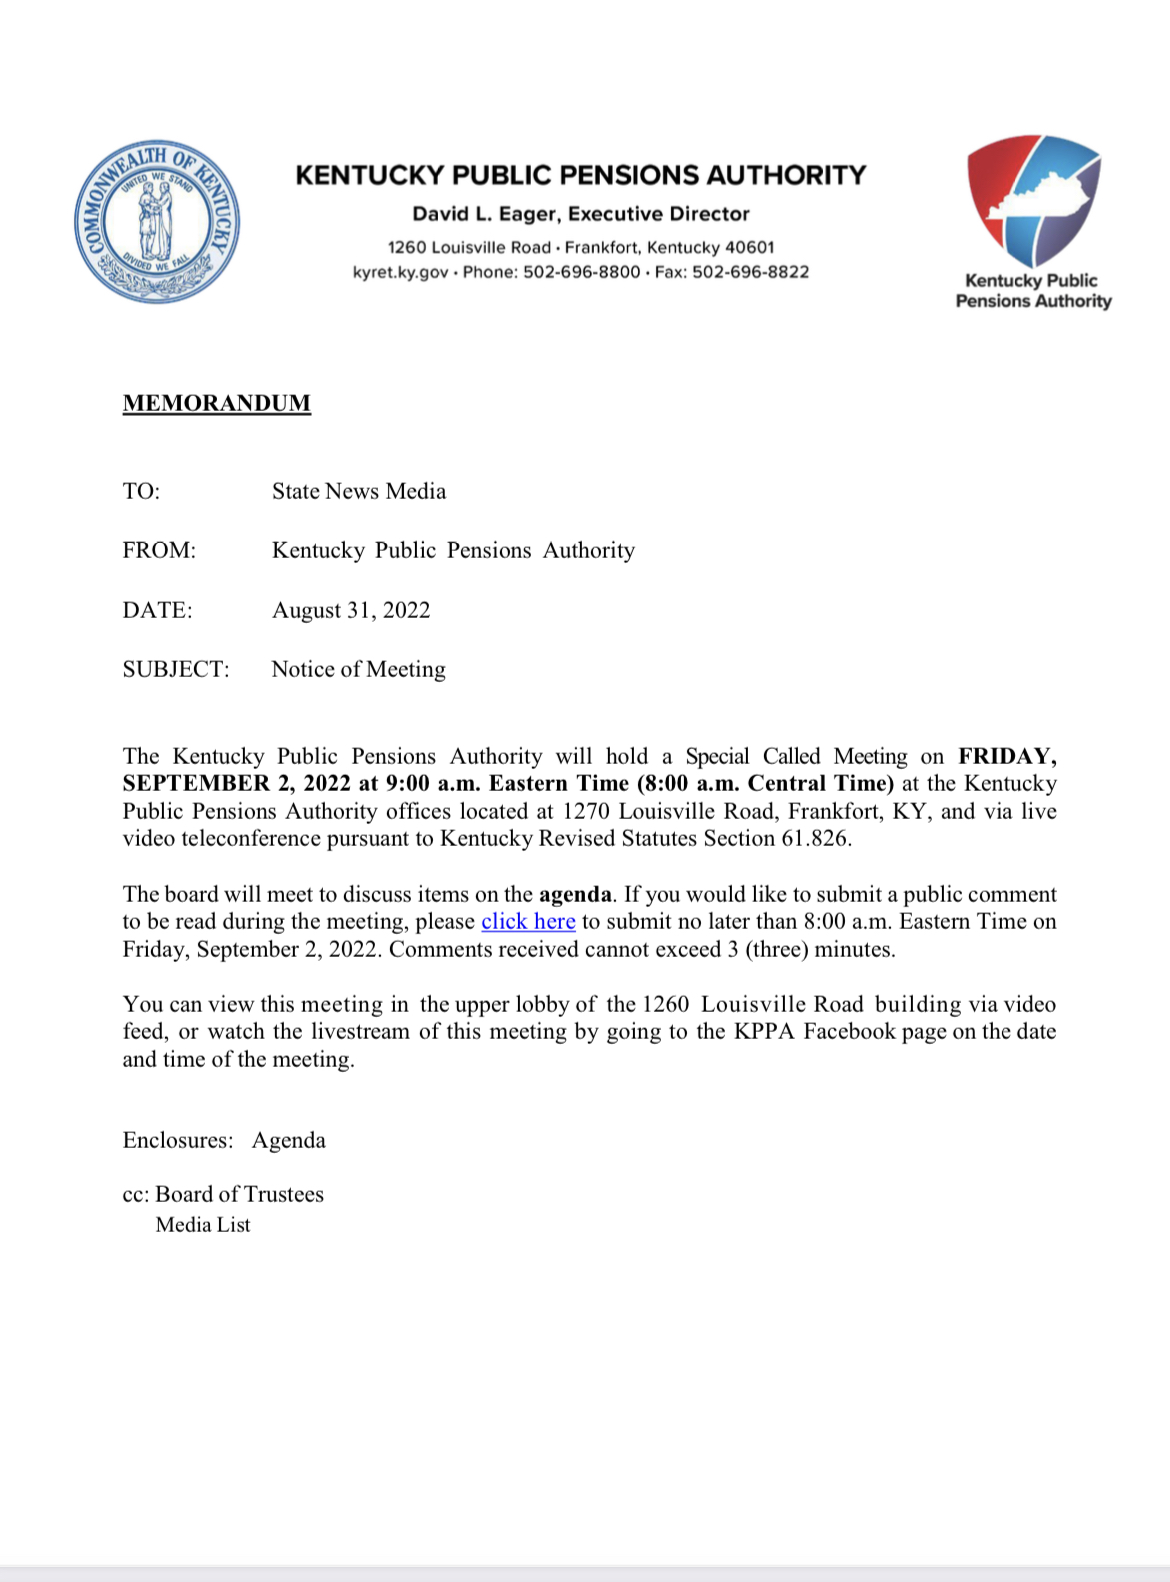 Meeting notice for KPPA’s September 2 Special Meeting